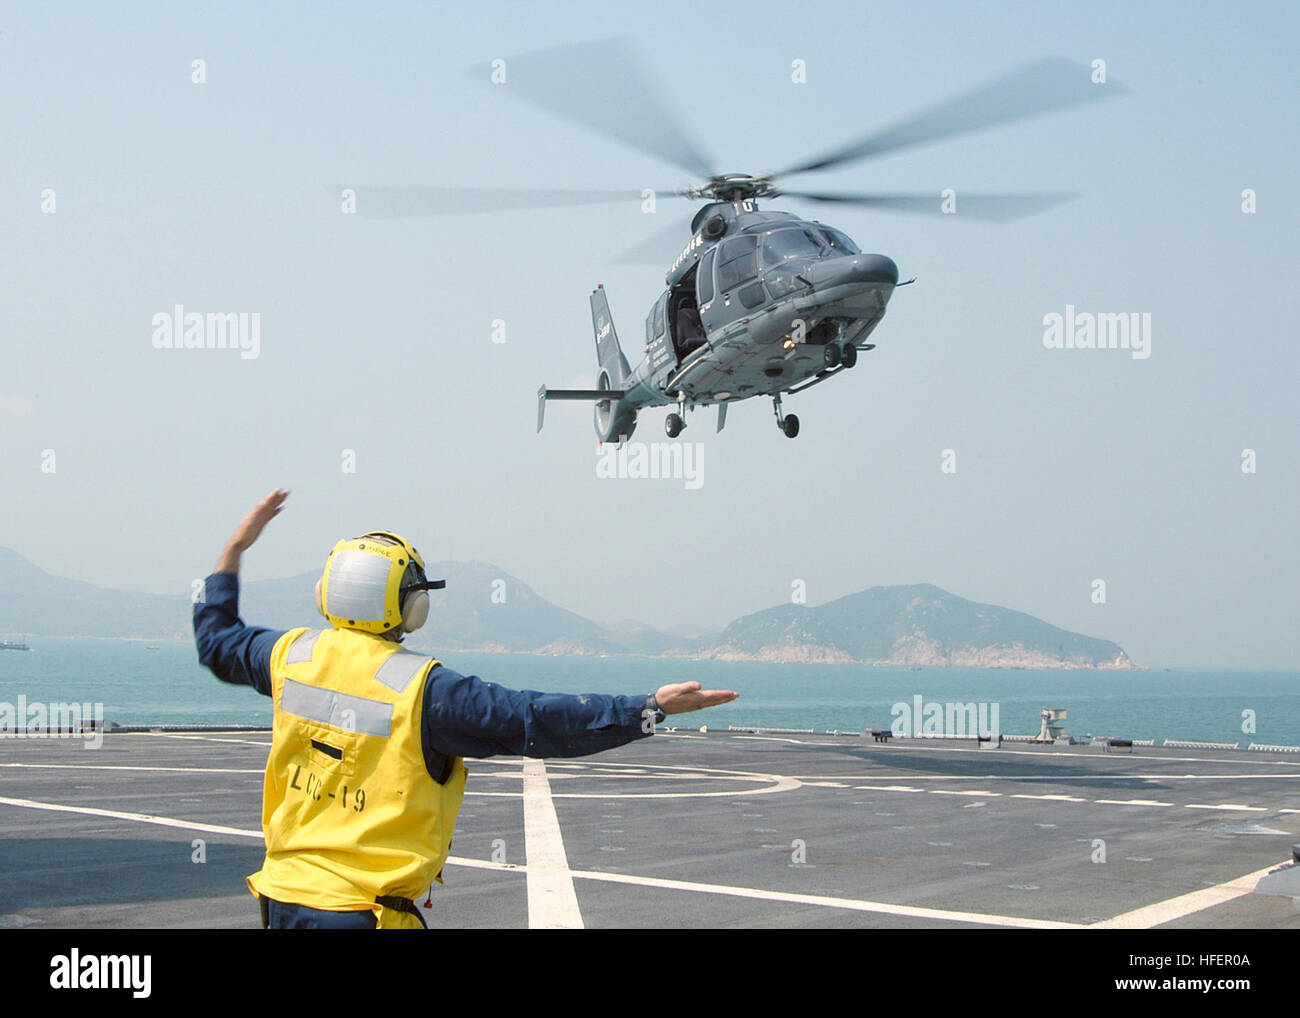 031101-N-8955H-002 Hong Kong (Nov. 1, 2003) -- Landing Signalman Enlisted (LSE) BoatswainÕs Mate 1st Class Joseph Mullen, from Seattle, Wash., signals an EC-155 Dauphin helicopter from the Hong Kong Government Flying Service to depart the ship's flight deck.  U.S. Navy photo by PhotographerÕs Mate 1st Class Novia E. Harrington.  (RELEASED) US Navy 031101-N-8955H-002 Landing Signalman Enlisted (LSE) Boatswain%%5Ersquo,s Mate 1st Class Joseph Mullen, from Seattle, Wash., signals an EC-155 Dauphin helicopter from the Hong Kong Government Flying Service to depart the sh Stock Photo